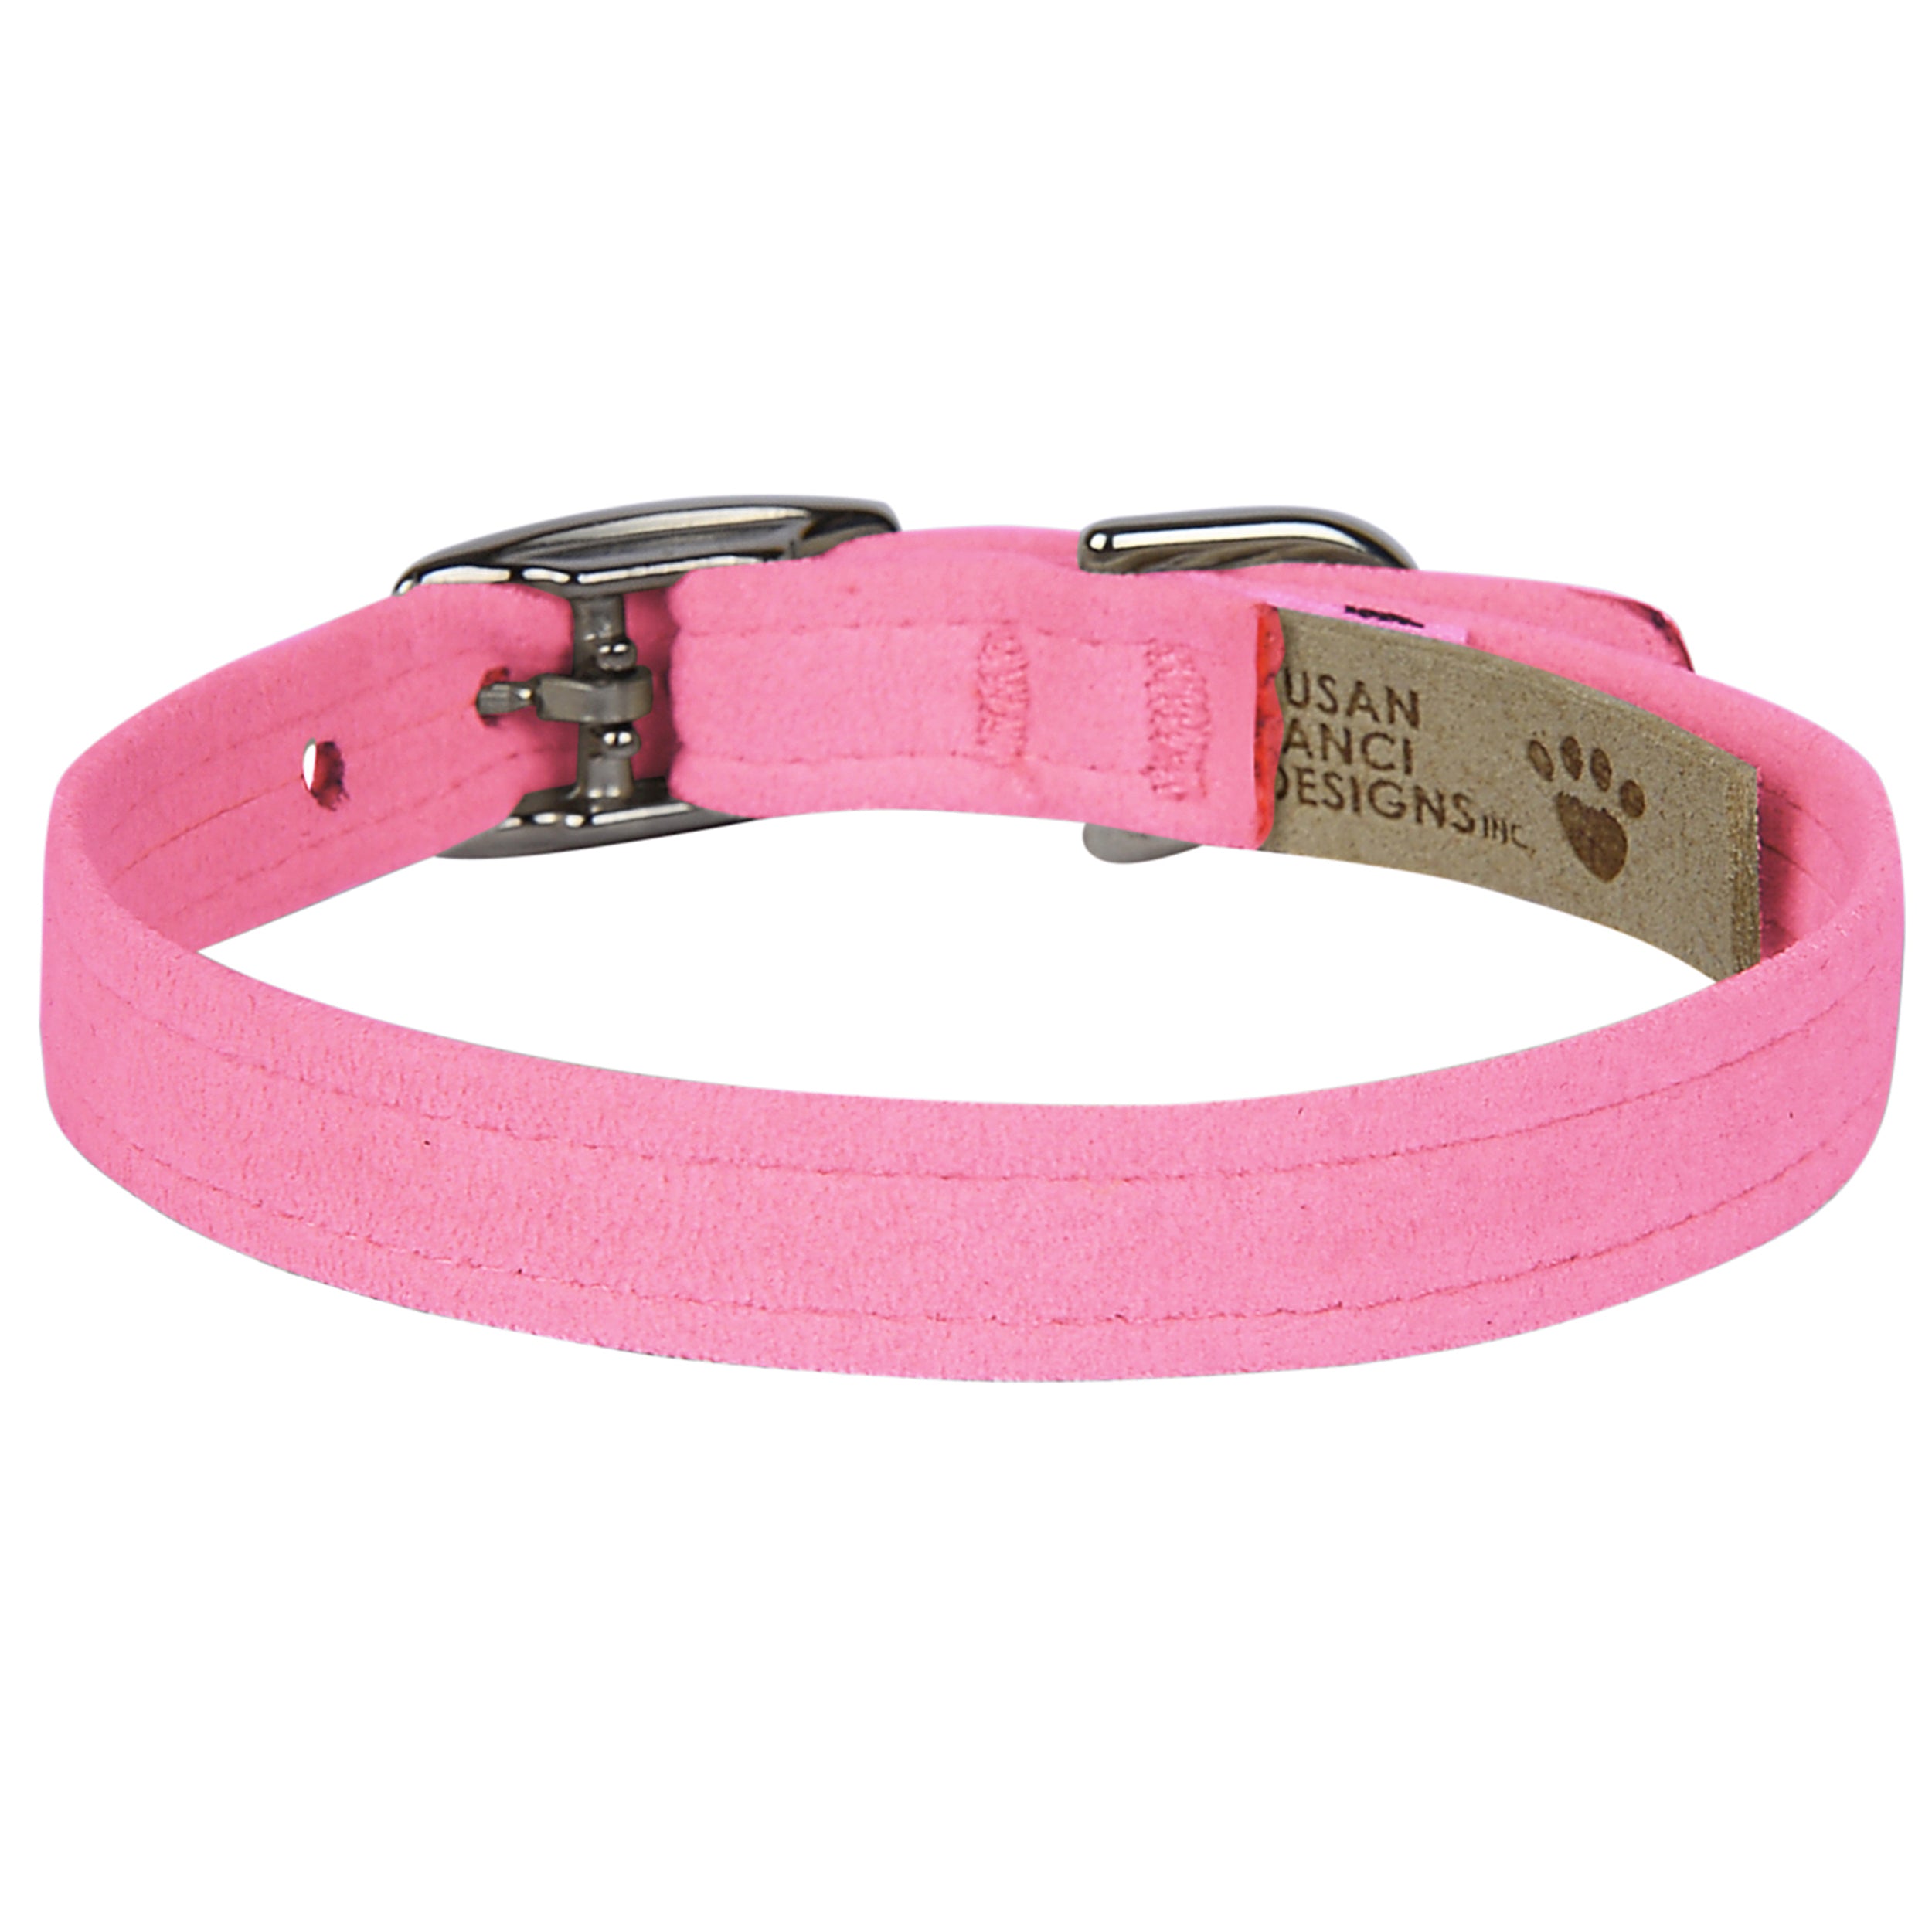 Great&Small Adjustable Collar Pink, Collars & Leads